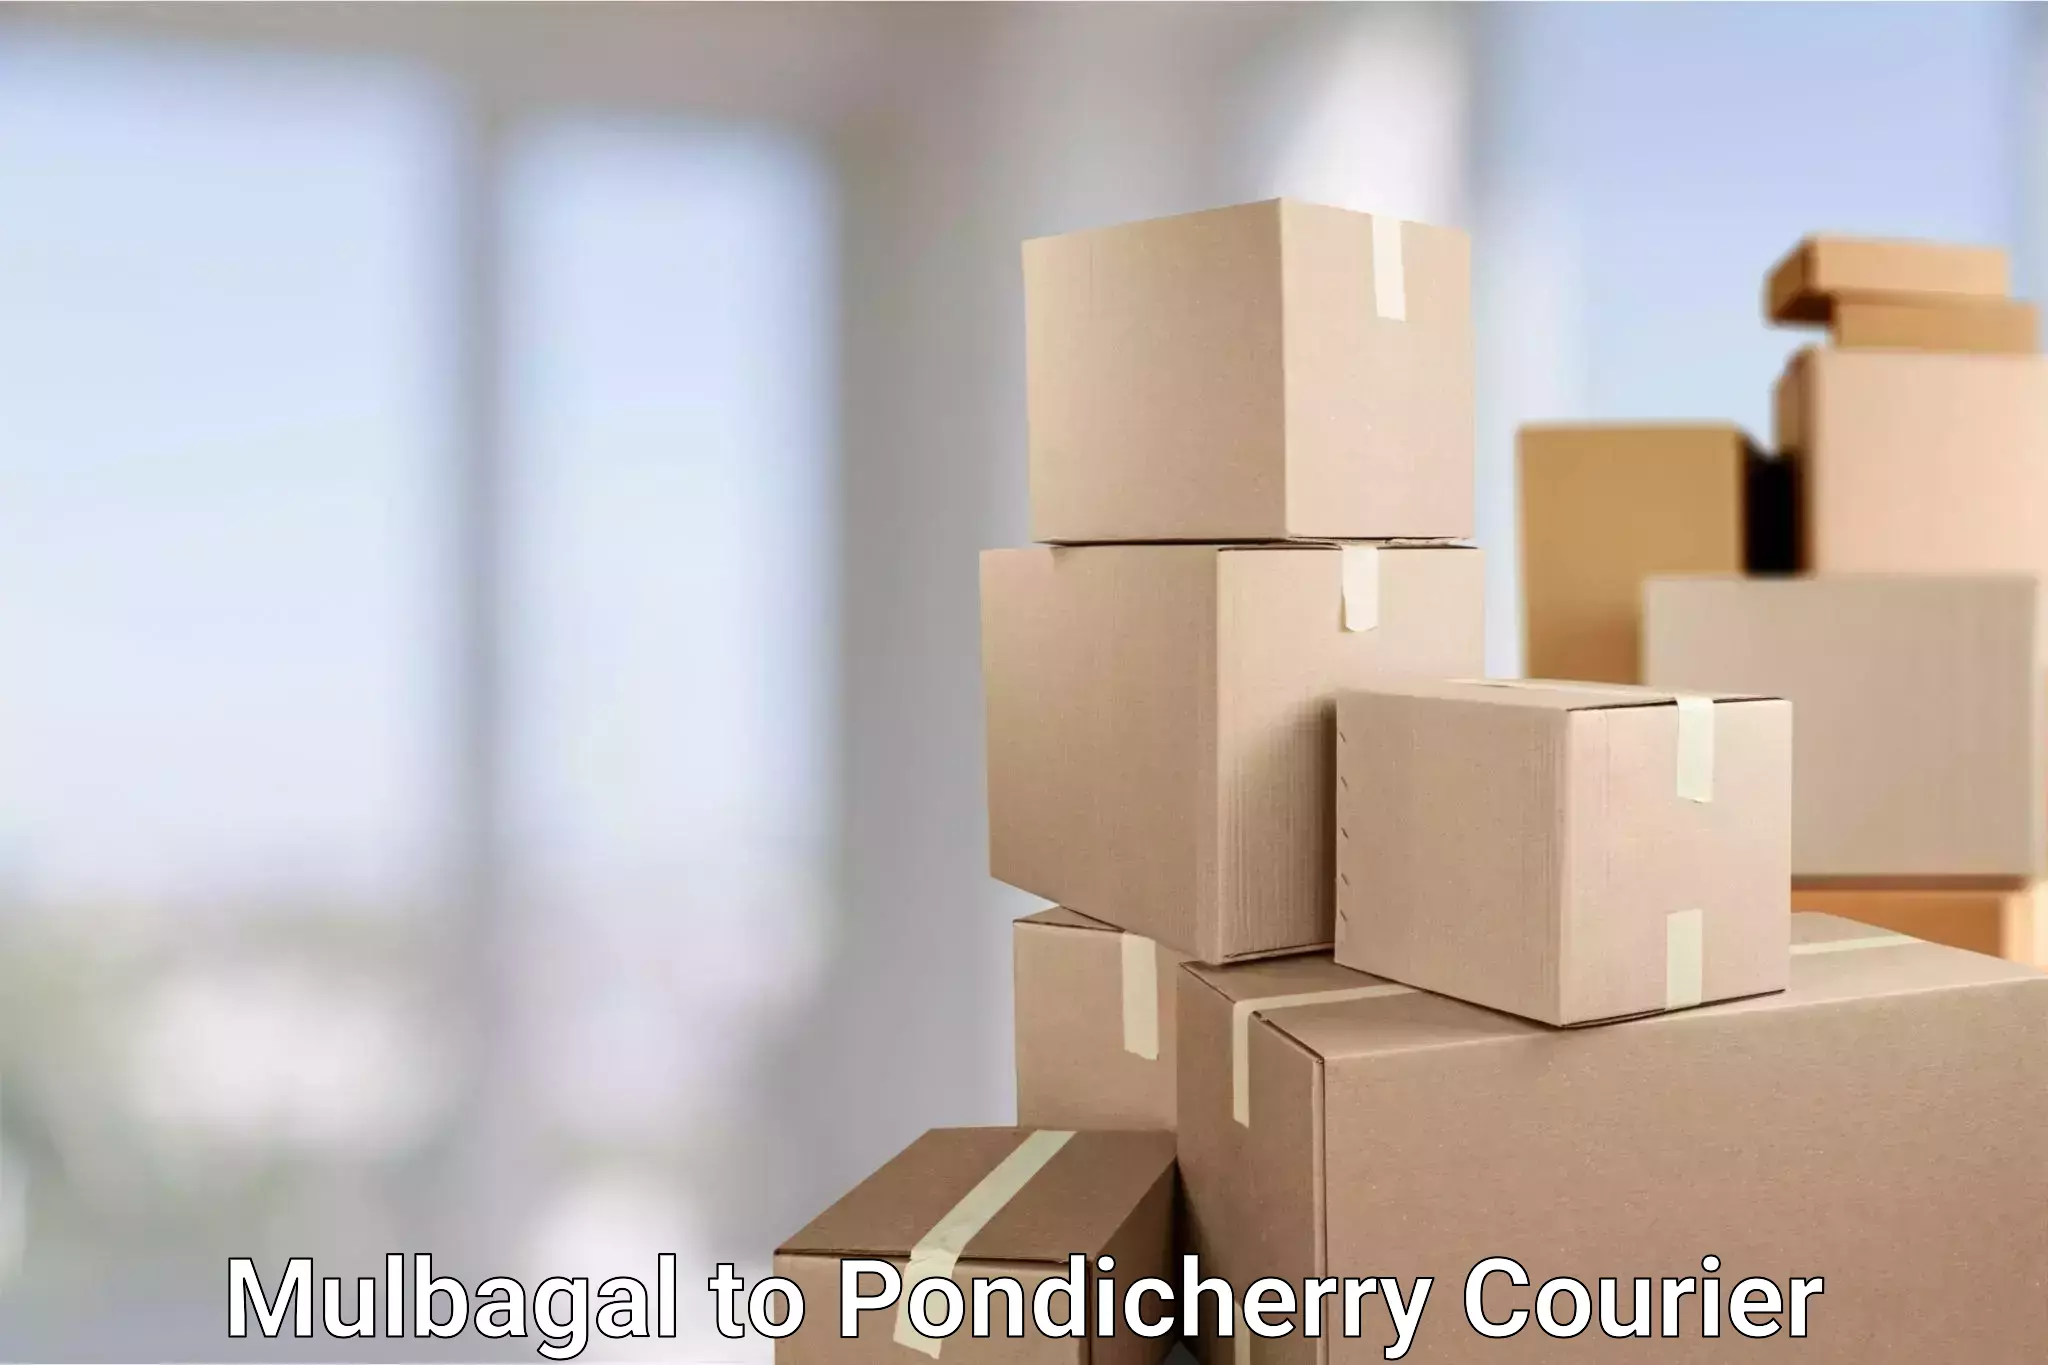 Courier service efficiency Mulbagal to Pondicherry